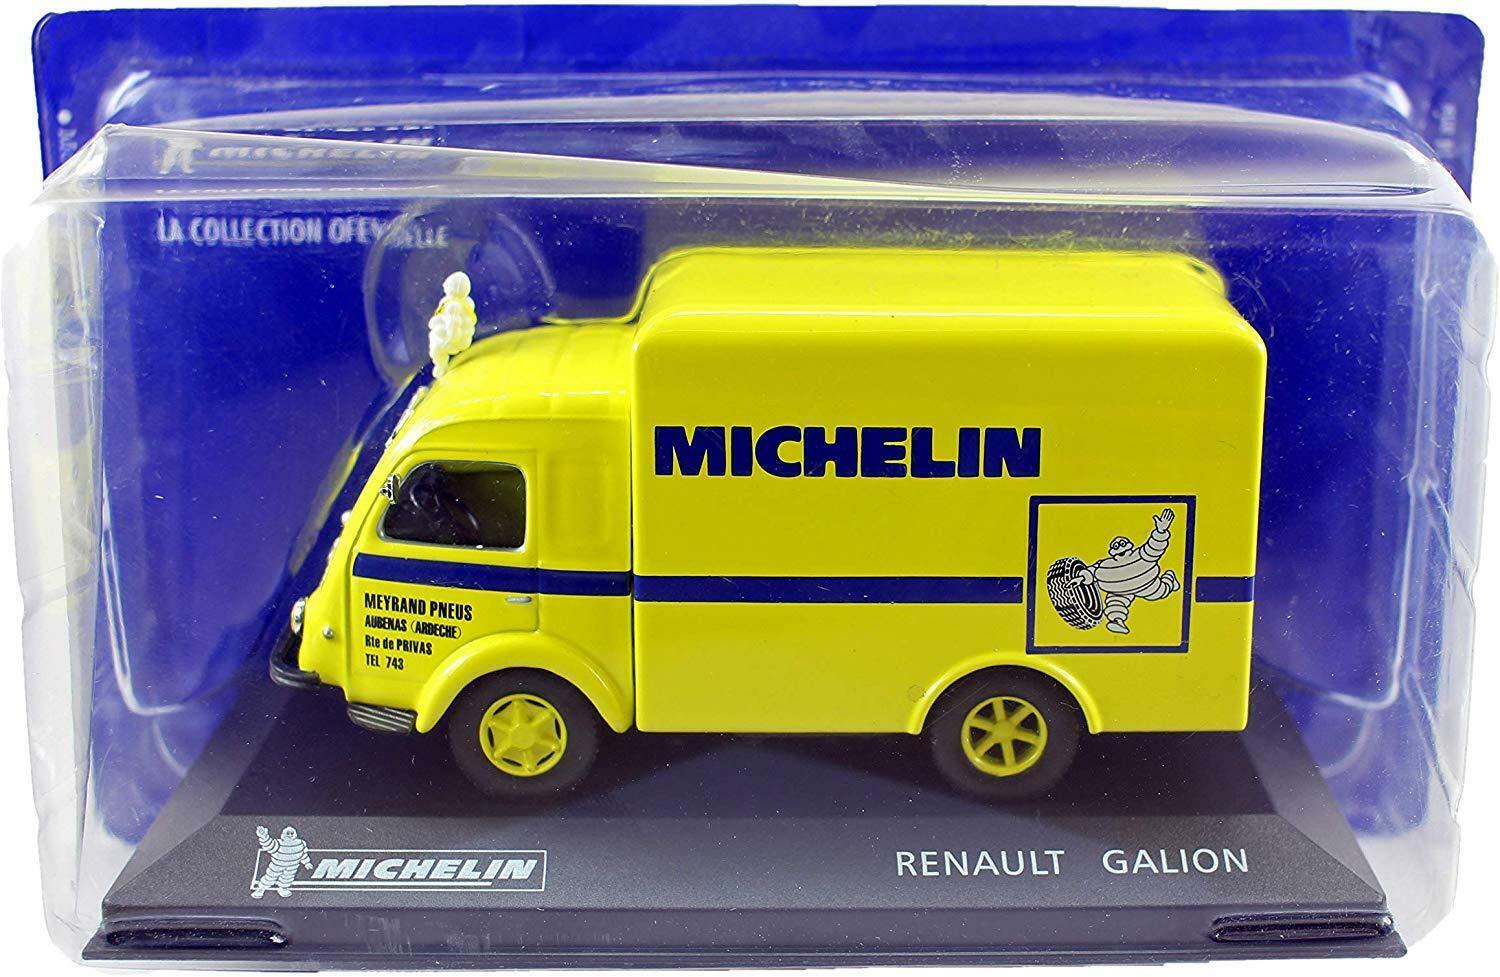 New IXO Official Michelin Collection 1:43 Diecast Renault Galion No.20 - Toptoys2u